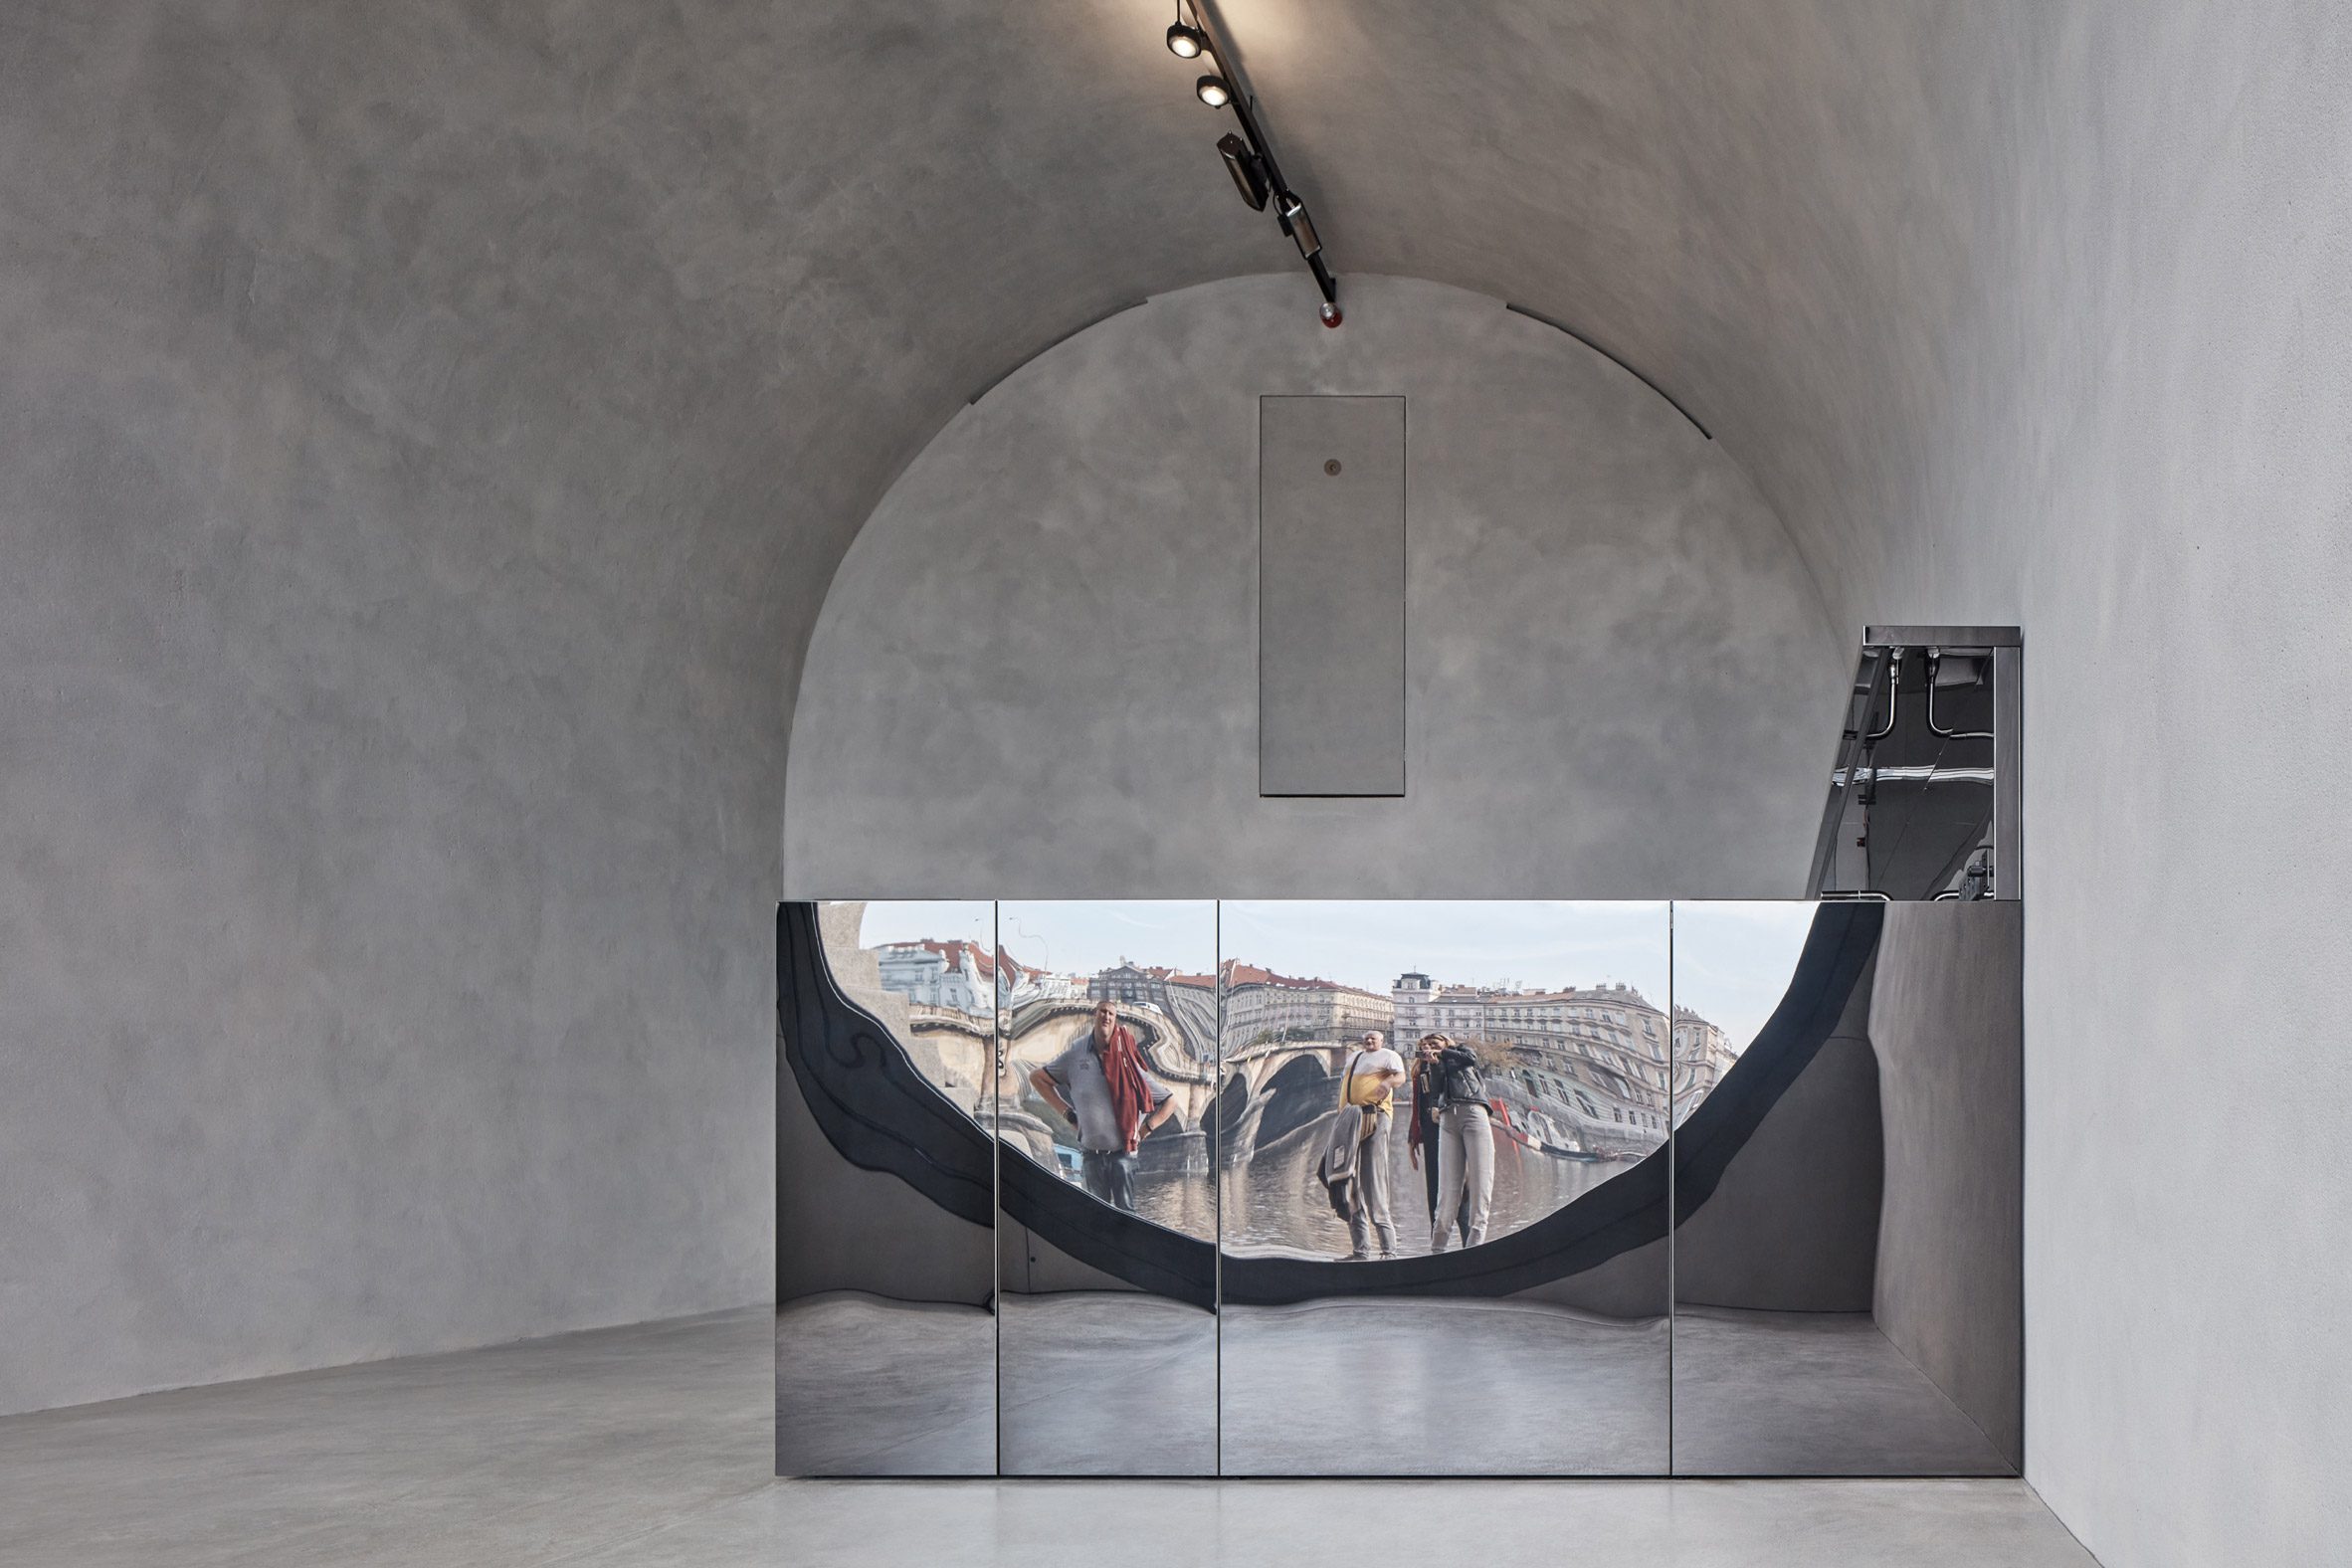 A mirrored counter reflects the prague waterfront